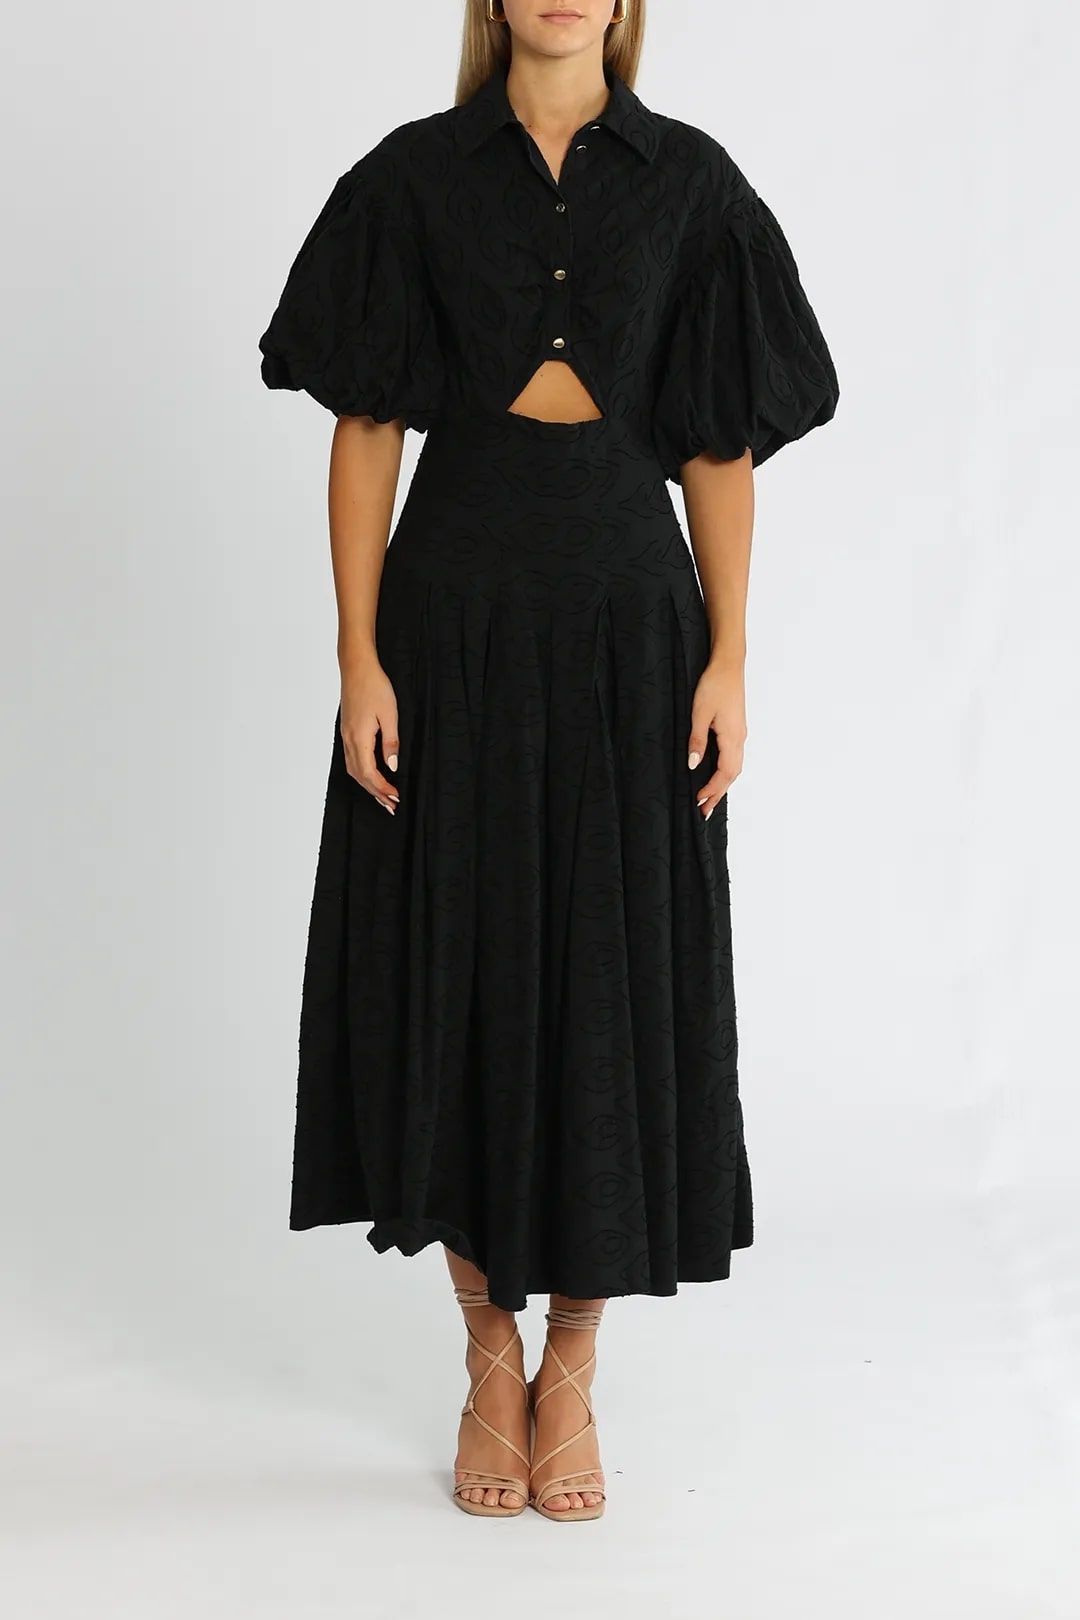 Hire Grange dress in black for evening events.